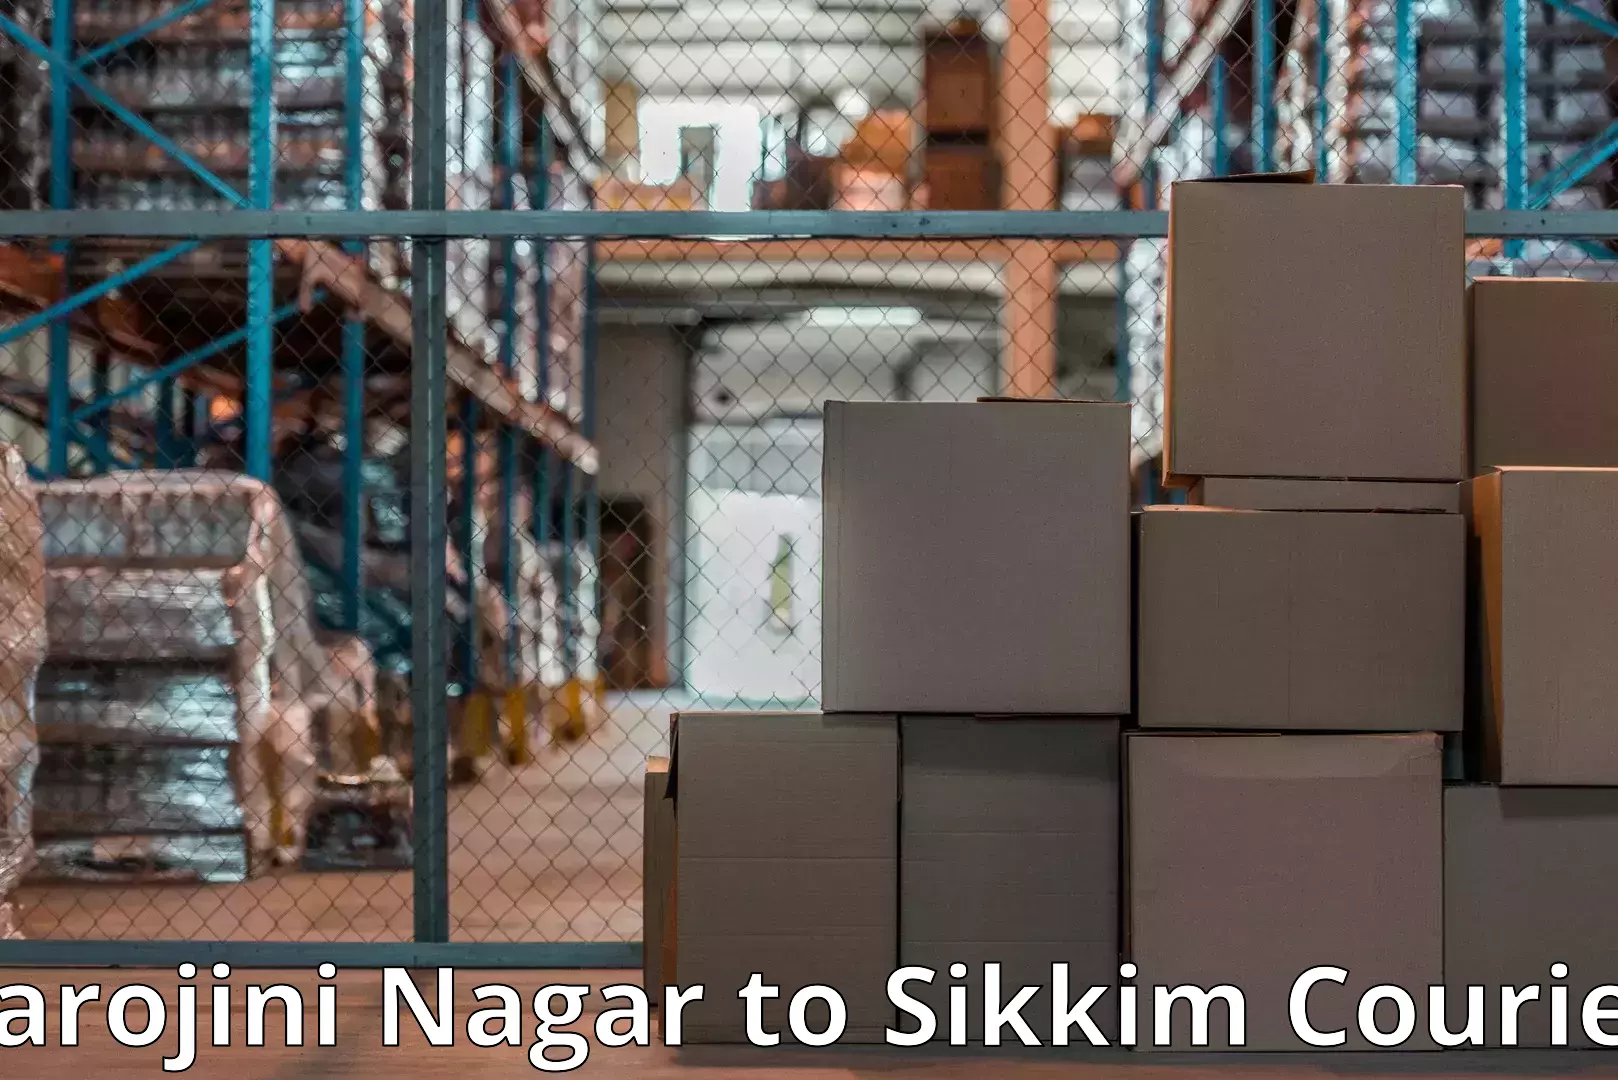 Trusted relocation experts Sarojini Nagar to East Sikkim